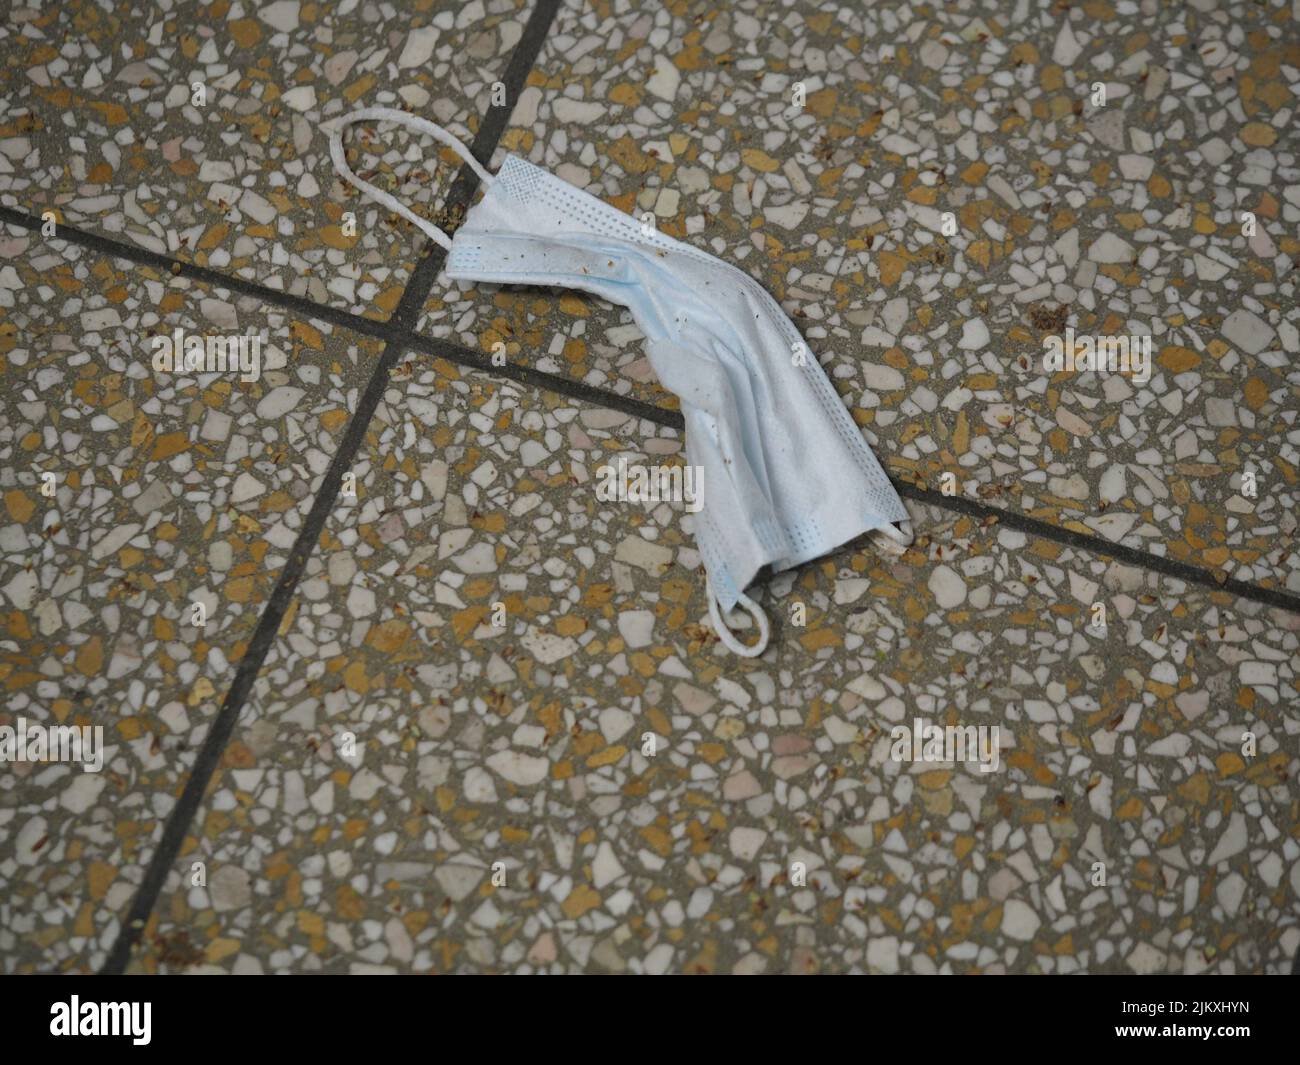 dirty used medical face mask laying on a tile floor in a central station Stock Photo